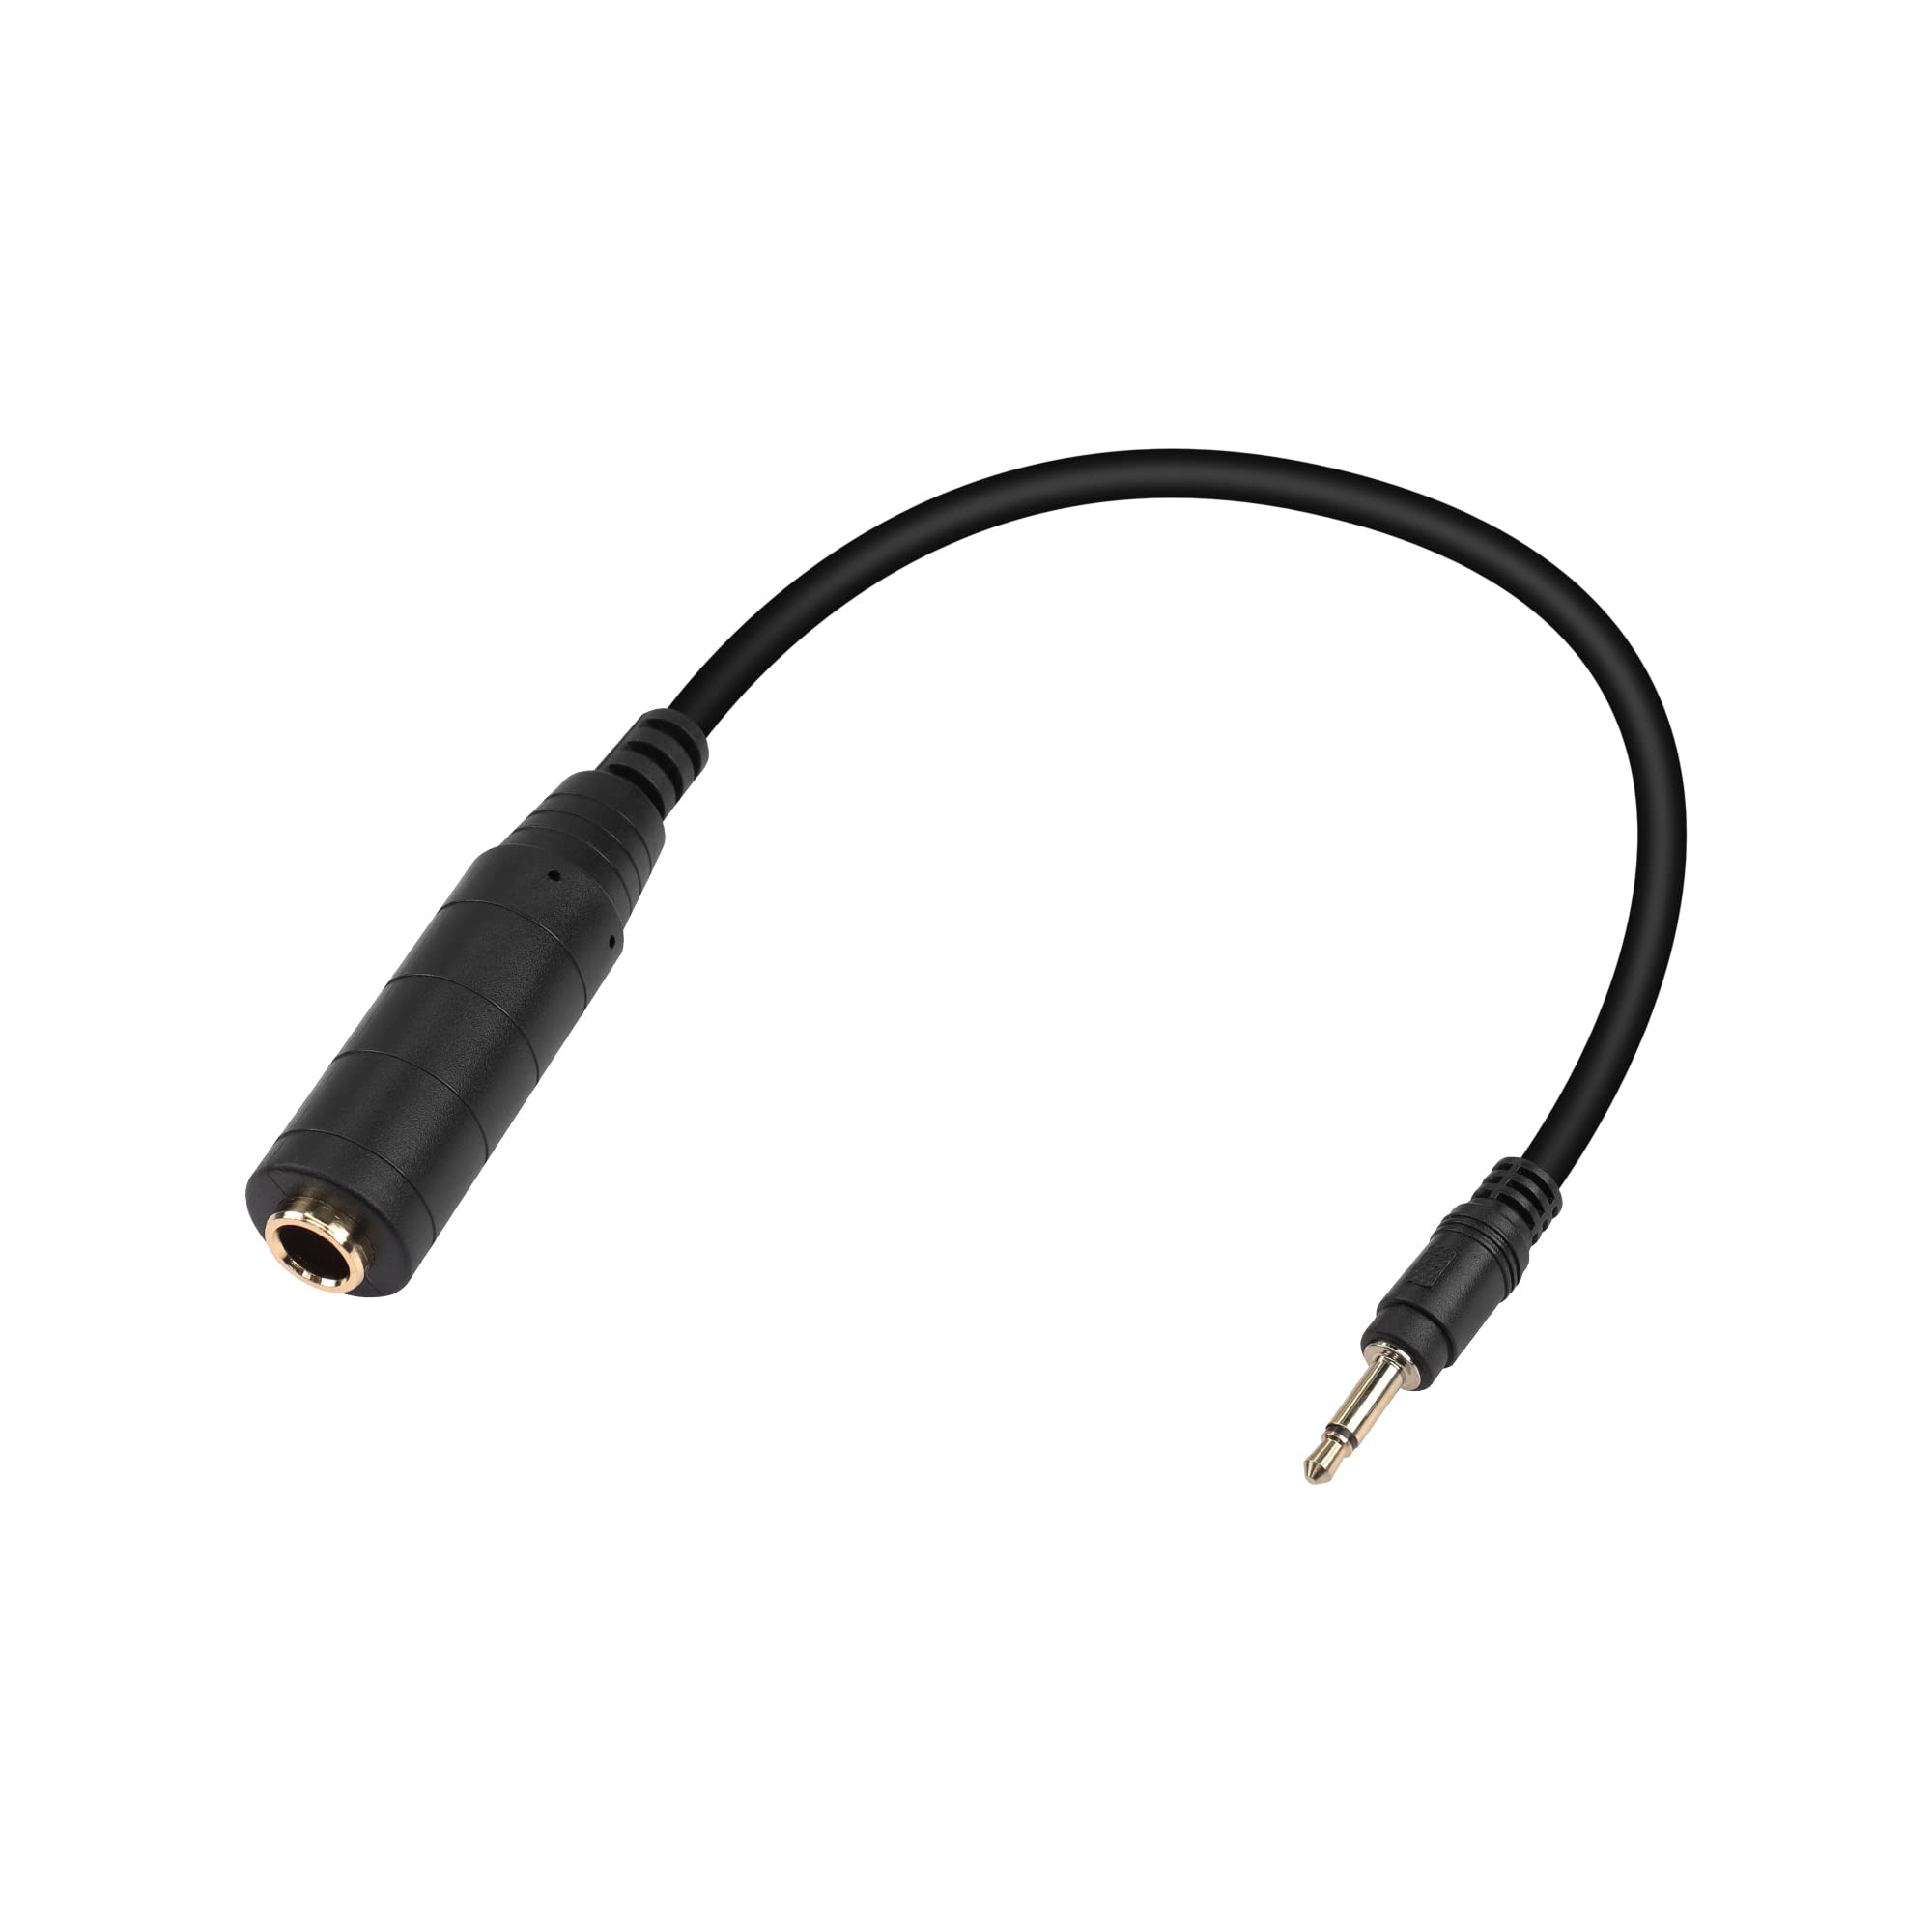 PNGKNYOCN 1/4 to 3.5mm Audio Adapter, 3.5mm (1/8 inch) TS Male to 6.35mm (1/4 inch) TS Female Short Cord for Amplifiers, Guitar, Home Theater Devices (0.3M)